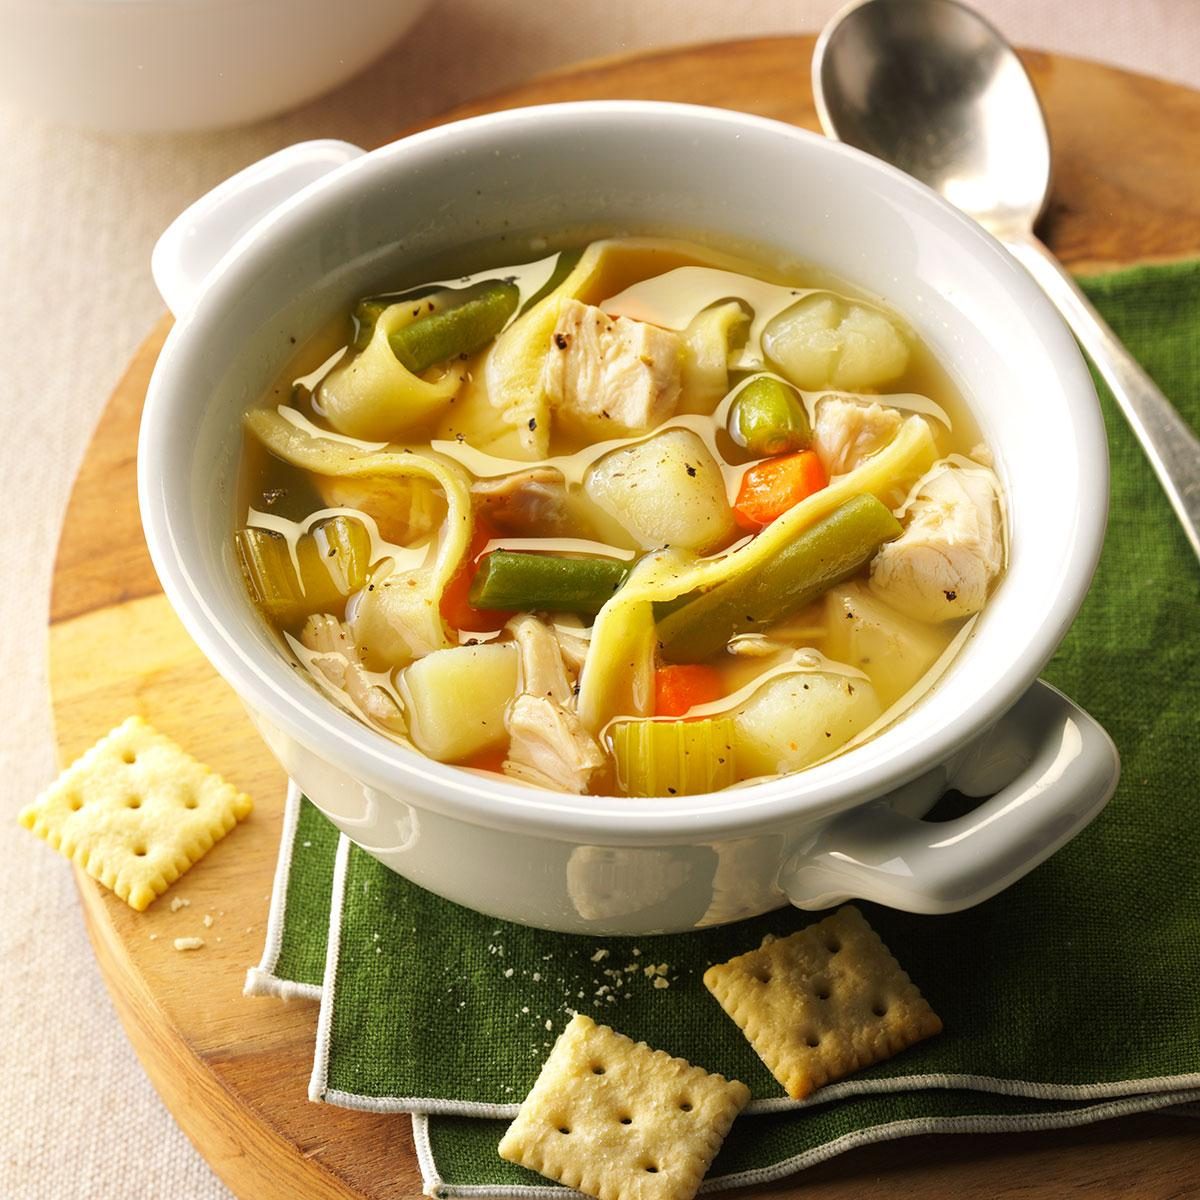 Mom's Chicken Noodle Soup Recipe: How to Make It